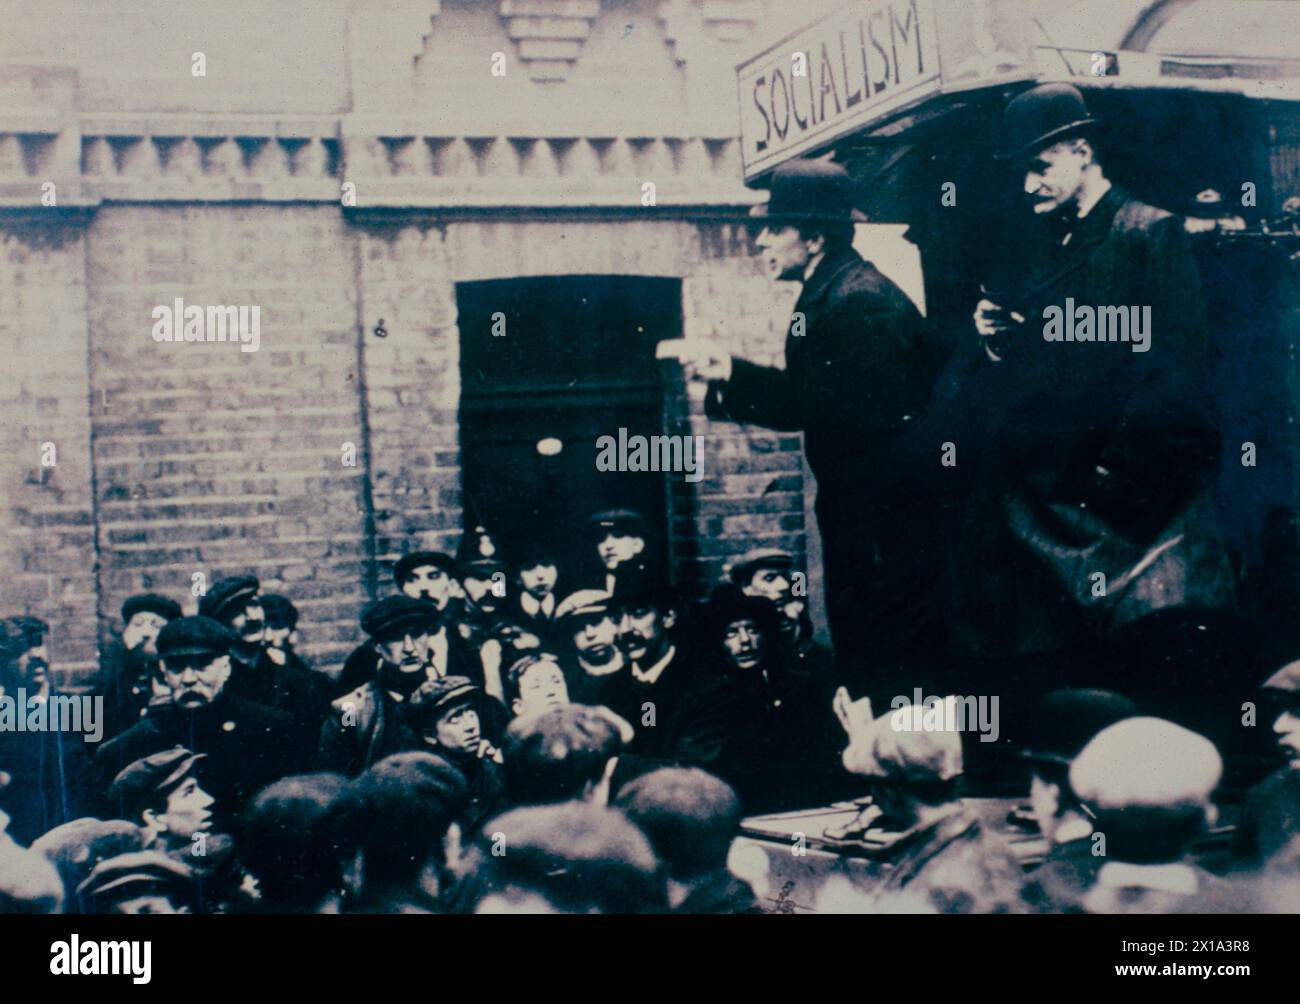 A socialist politician addresses a group of people, London, England 1911 Stock Photo